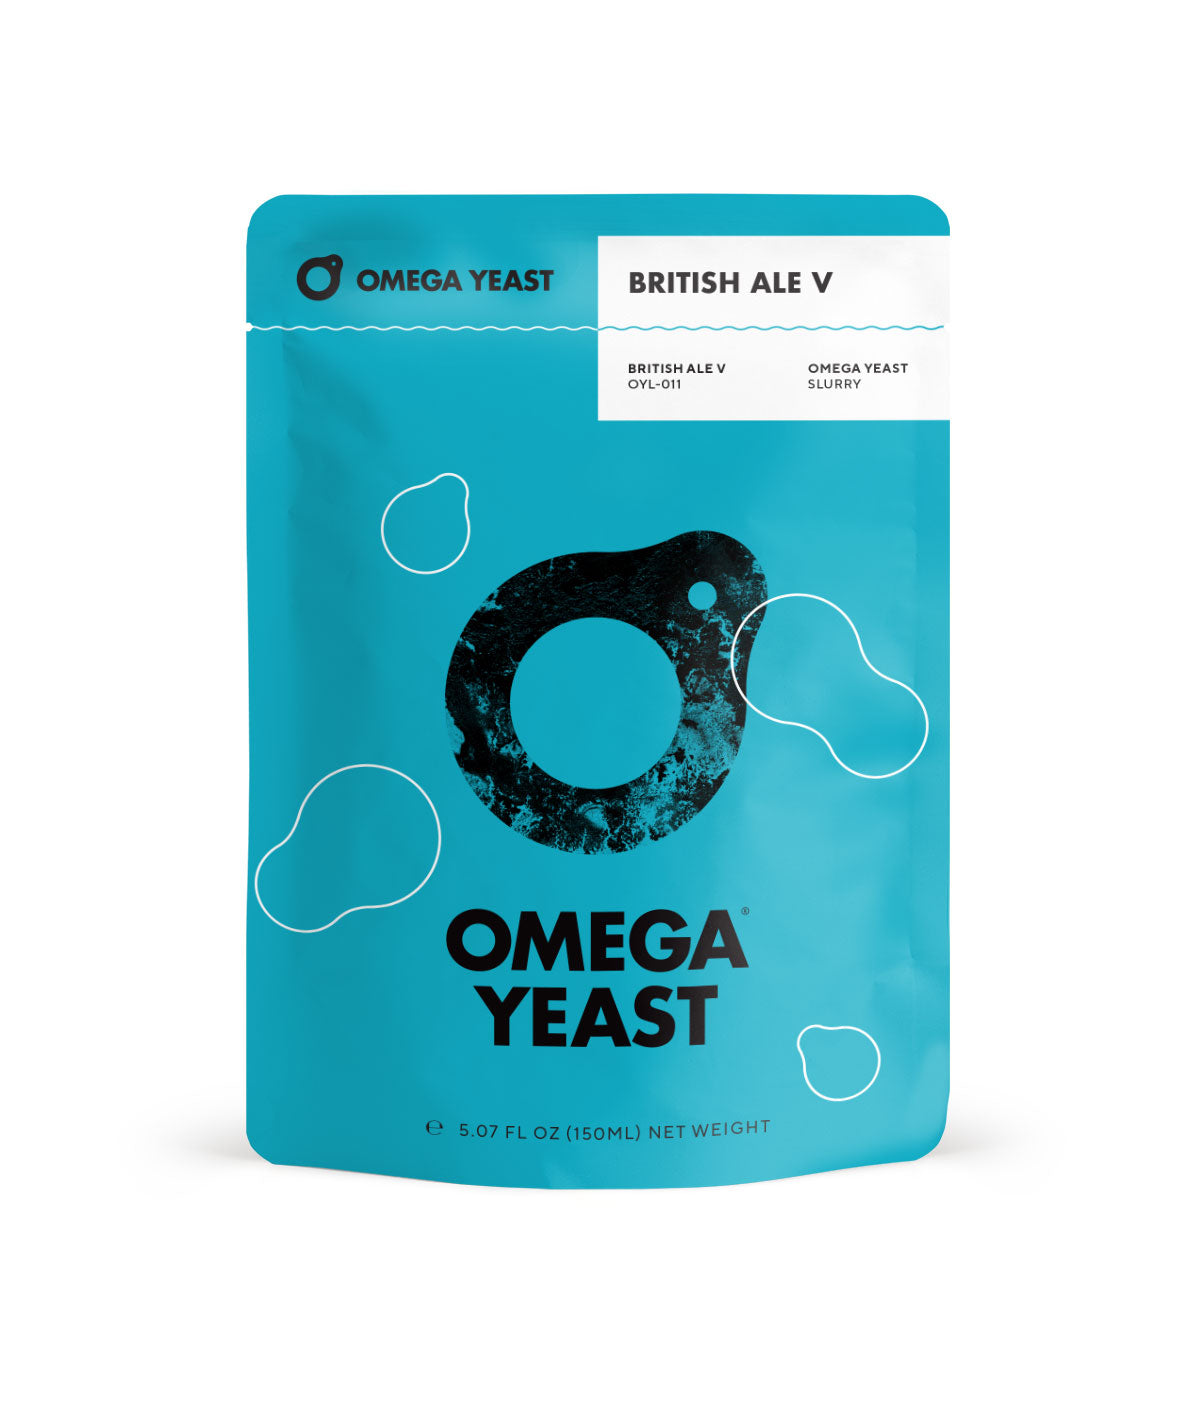 British Ale V Yeast by Omega Yeast